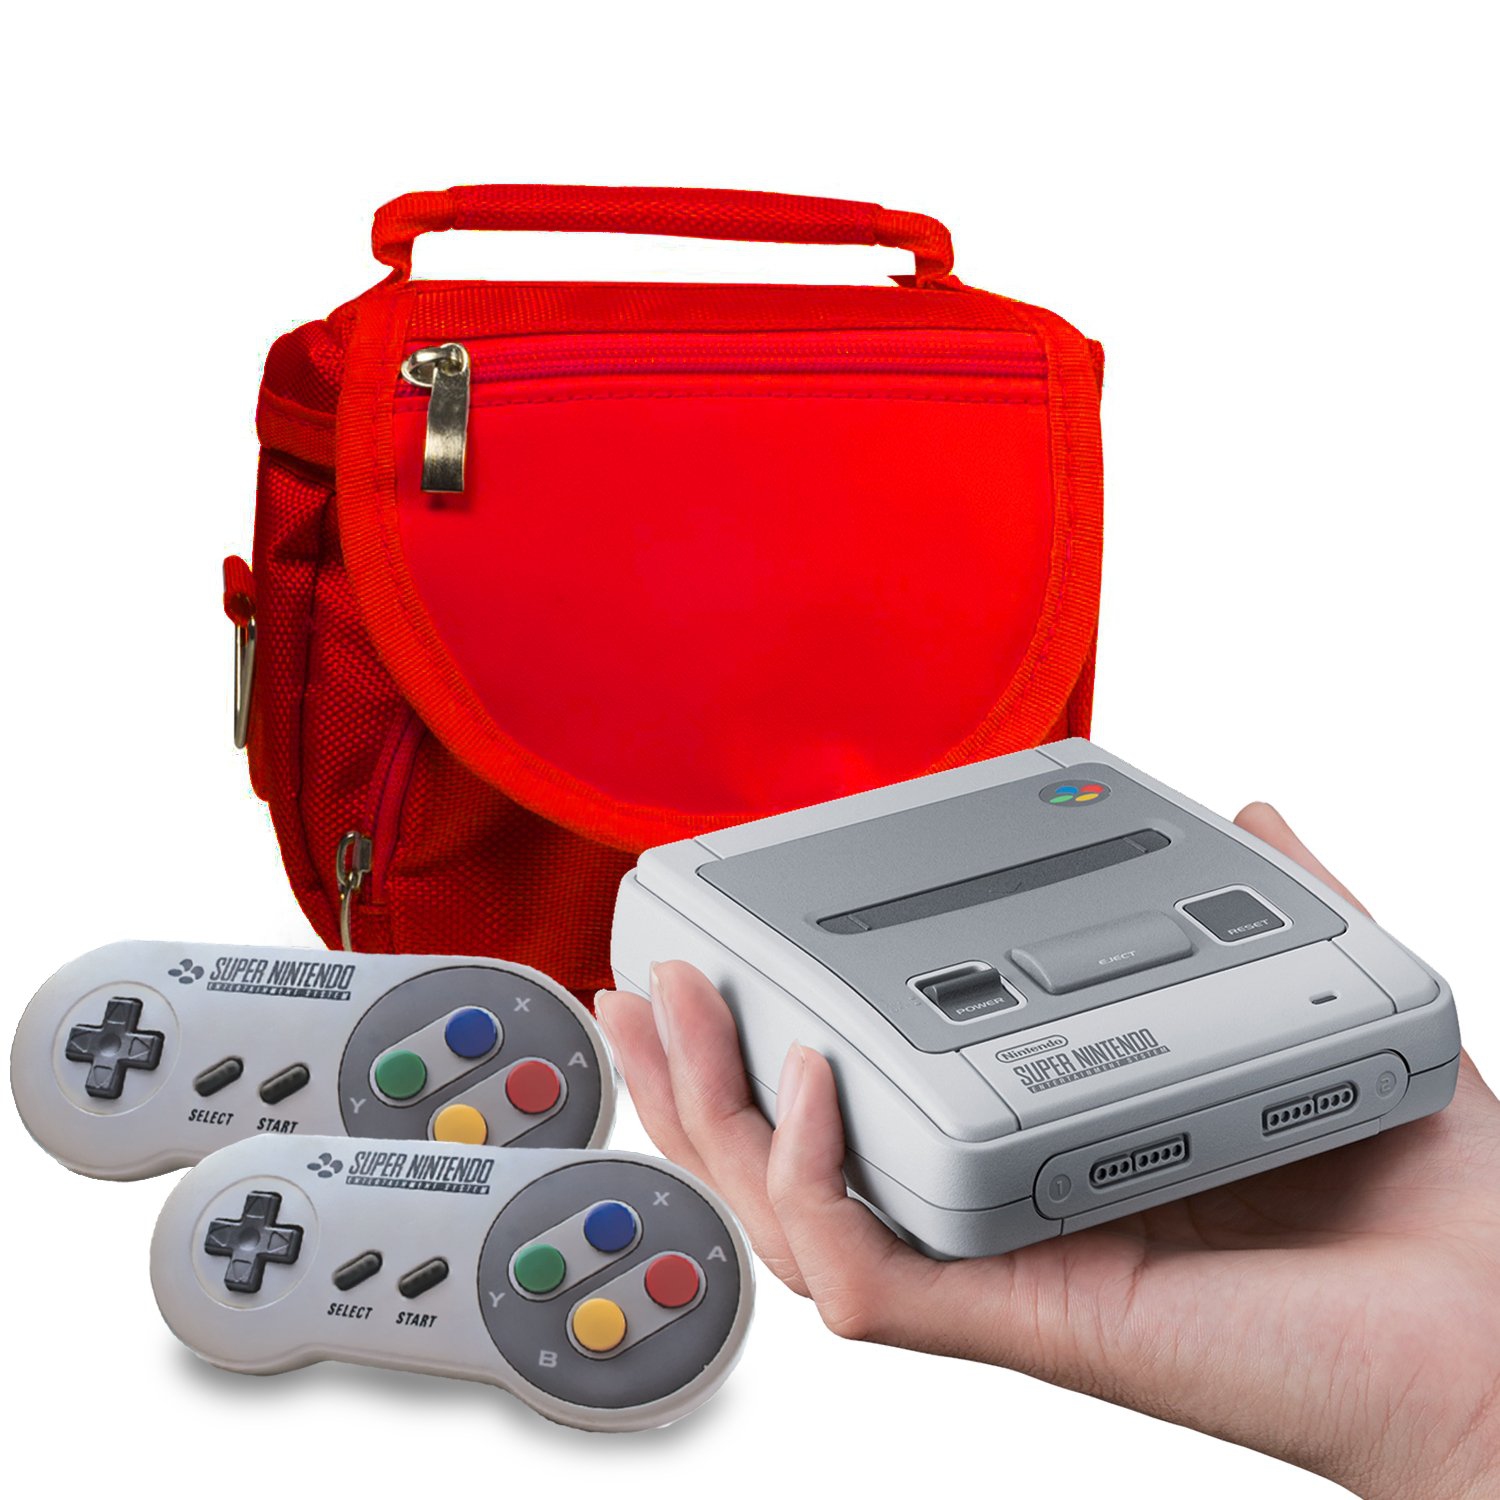 Travel Bag for Super Nintendo Mini Classic Edition (New 2017 Model Mini Version of Super NES) - Fits Console + Cable + 2 Controllers - Includes Shoulder Strap + Carry Handle - RED